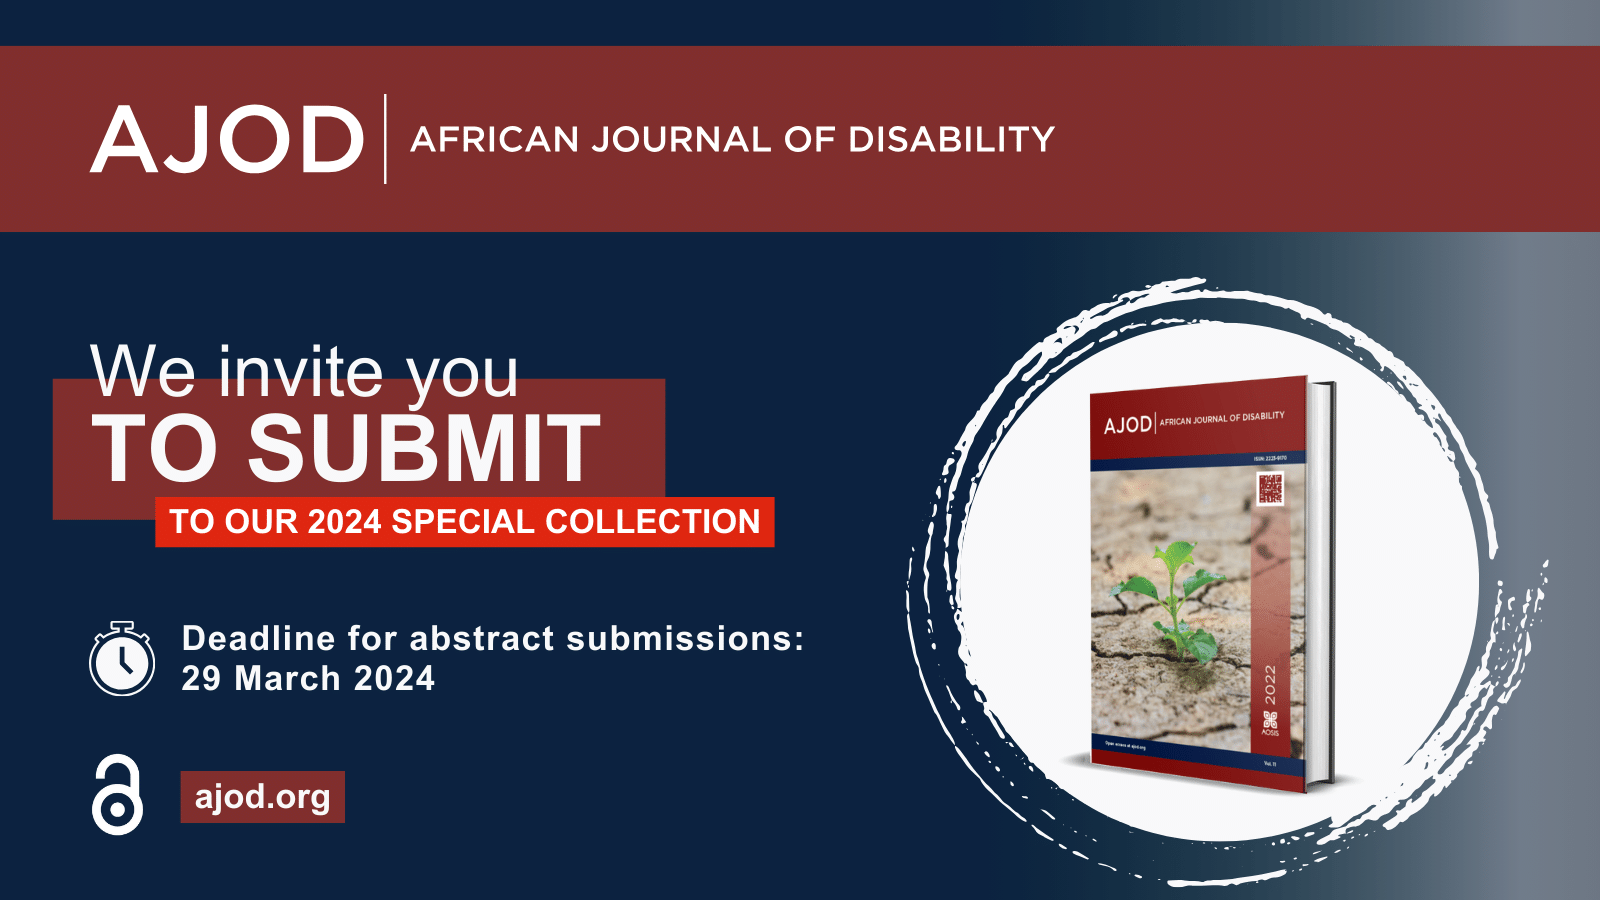 'African Journal of Disability' 2024 Special Collection